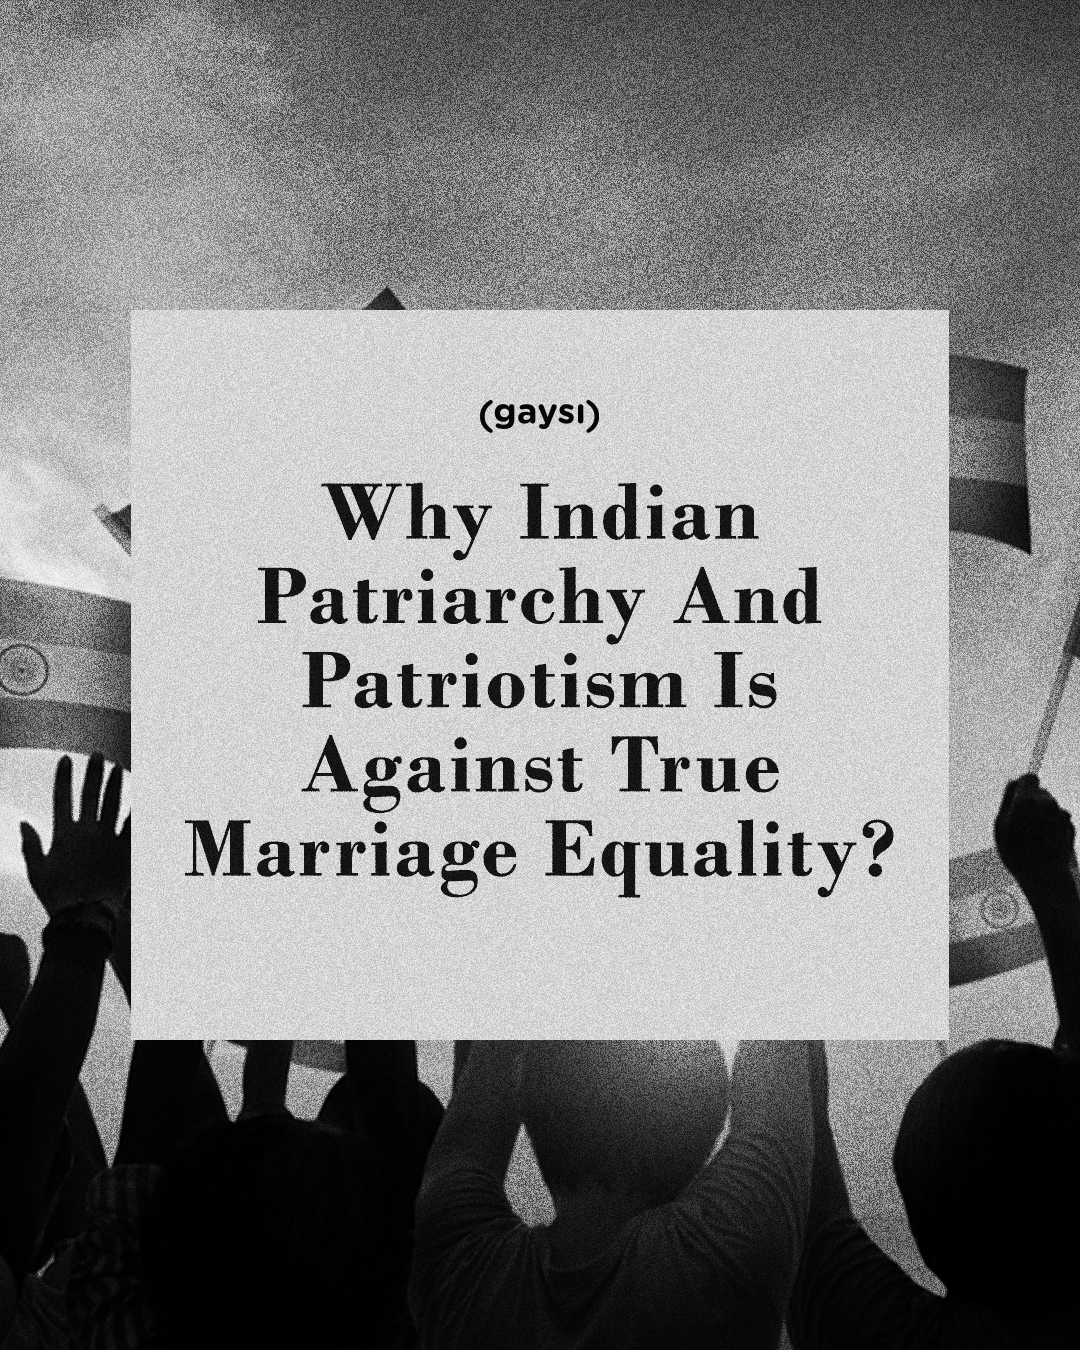 Why Indian Patriarchy And Patriotism Is Against True Marriage Equality?